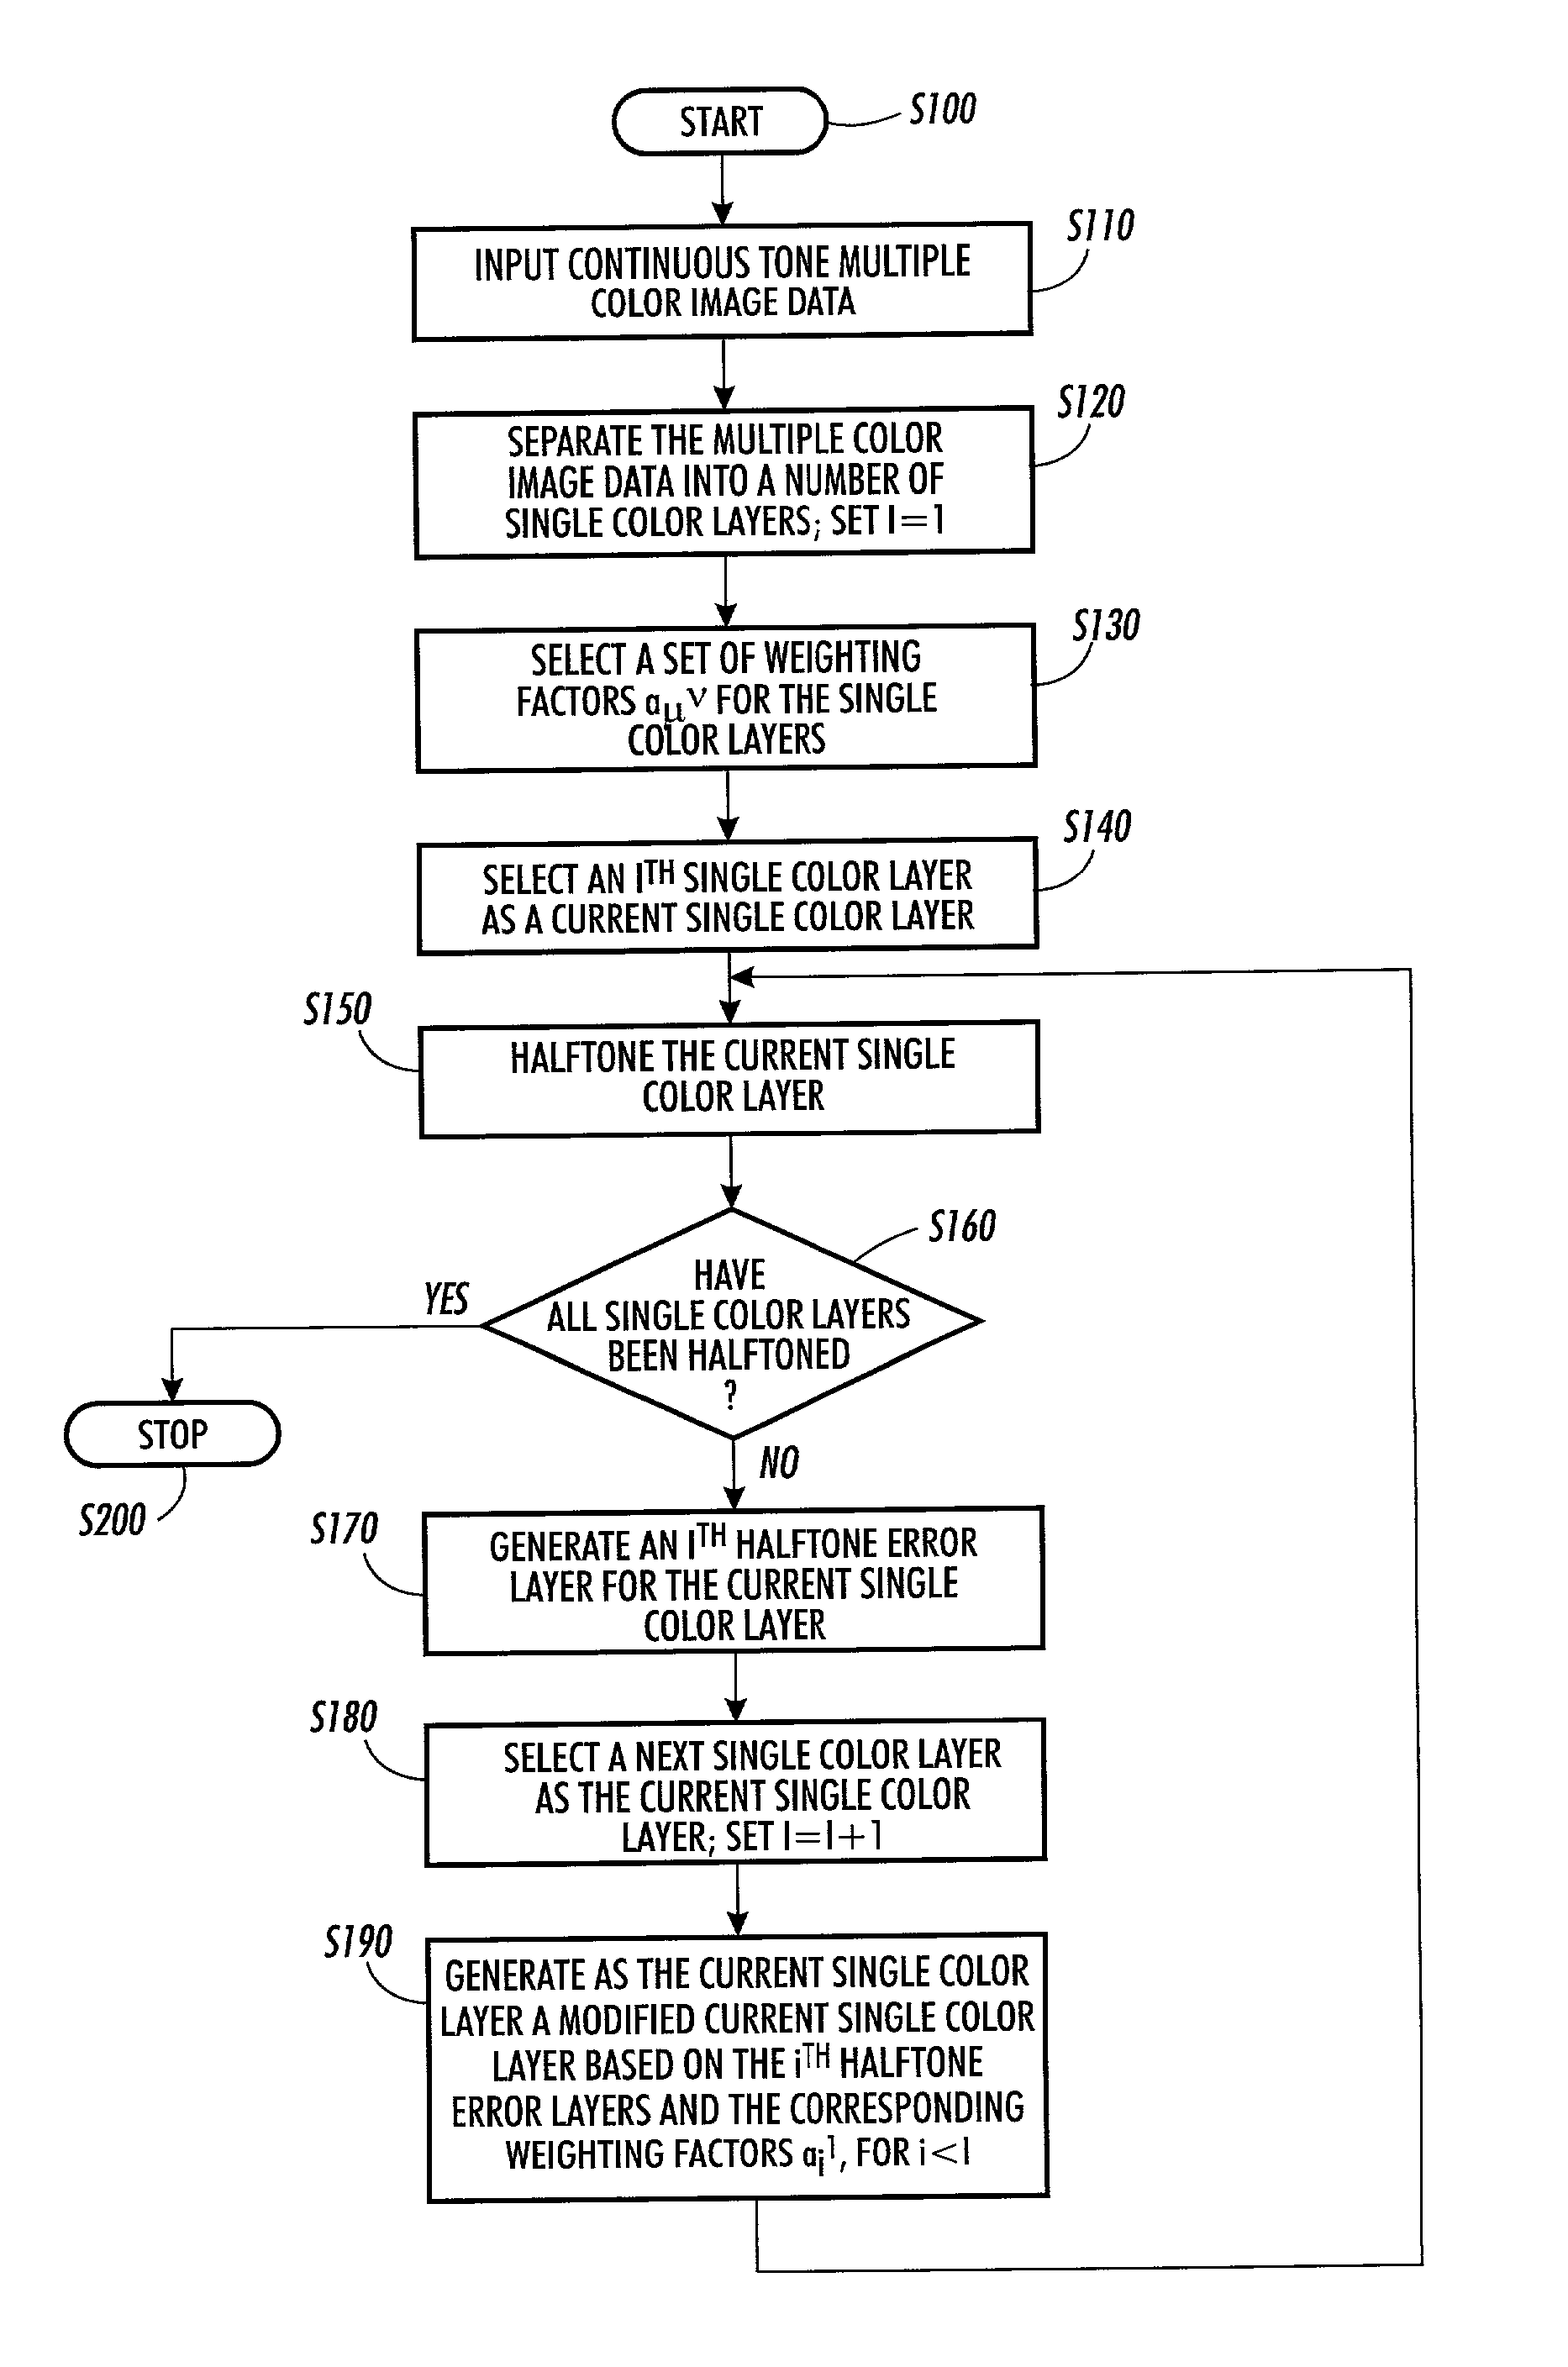 Systems and methods for halftoning multiple color separation layers by interlayer error diffusion